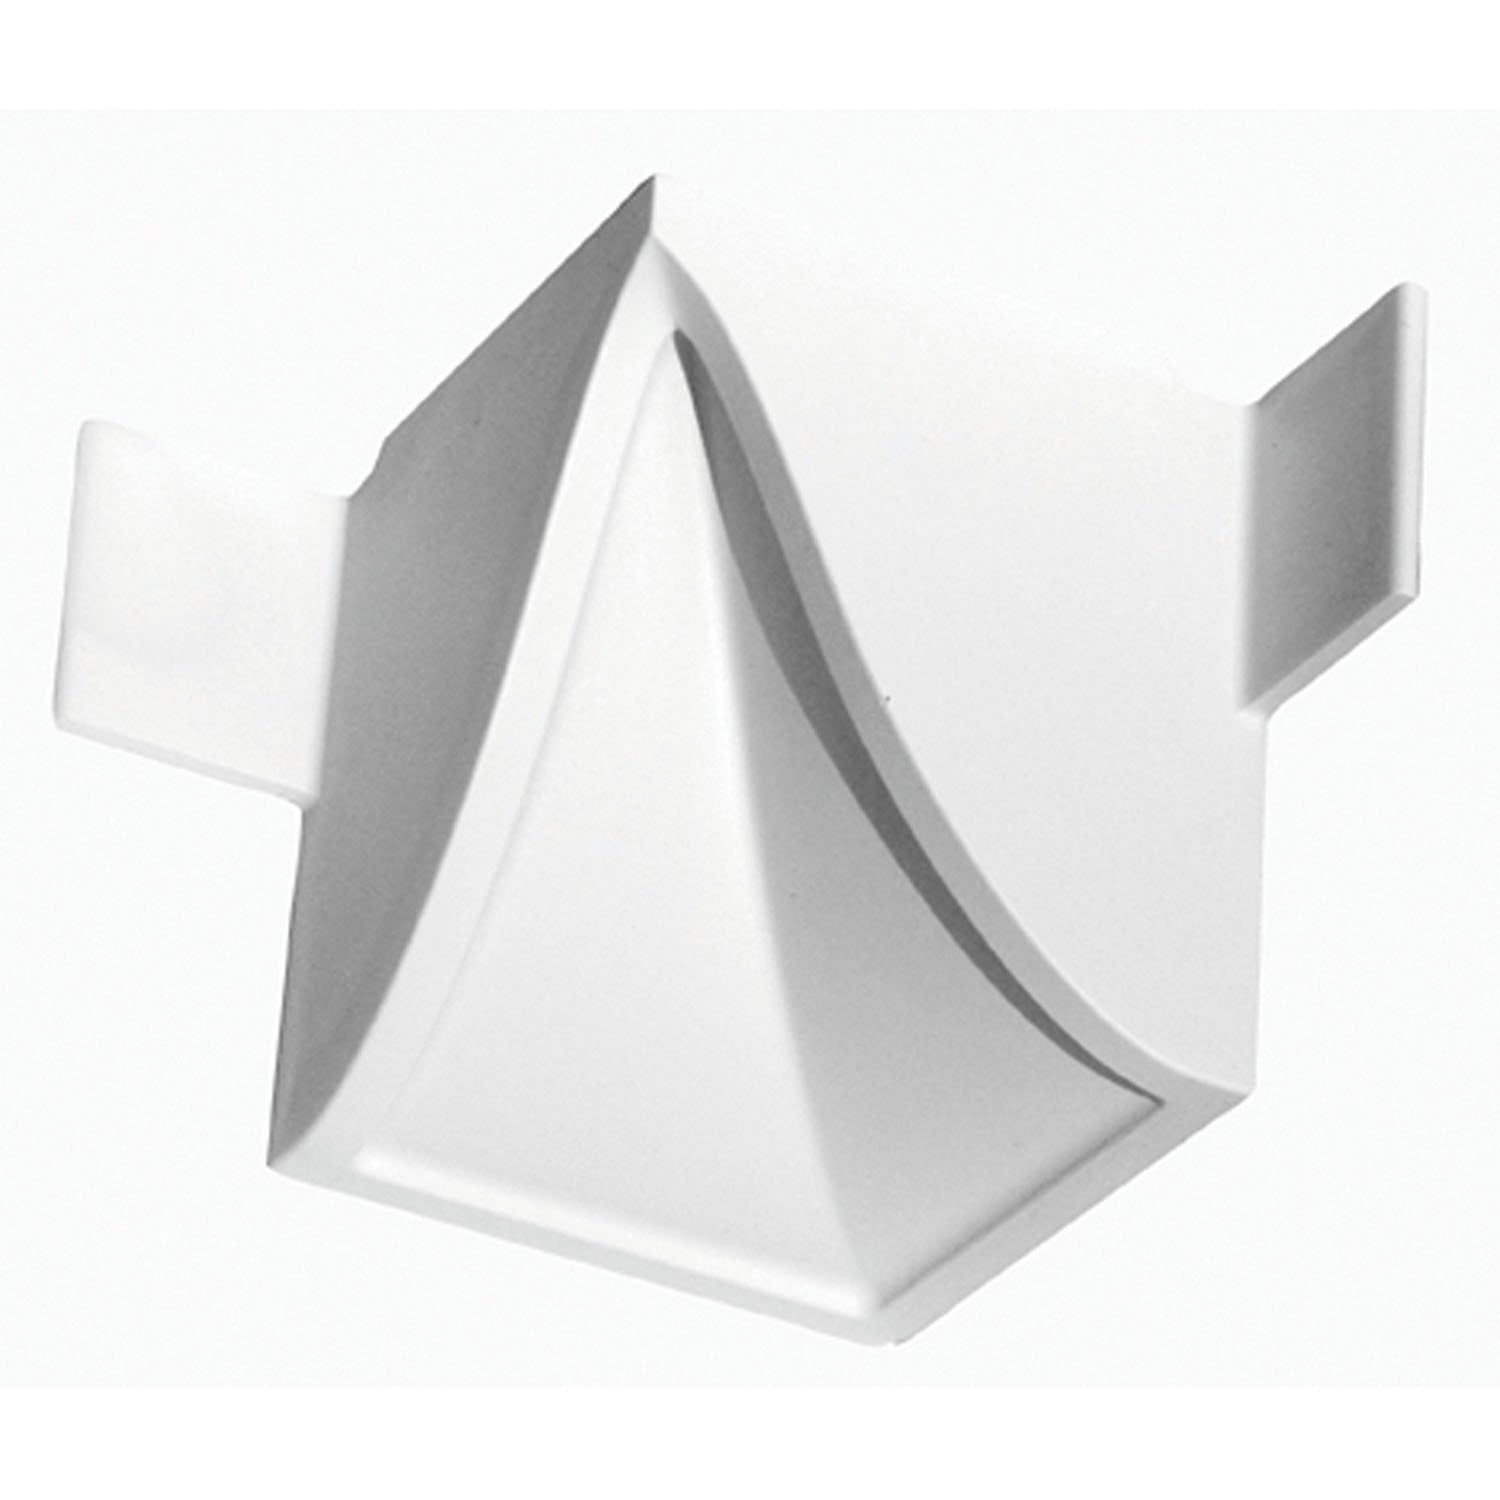 Focal Point Lighting 21600 Accessories 5 7/8 Quick Clips System B Inside Corner Block Decor White